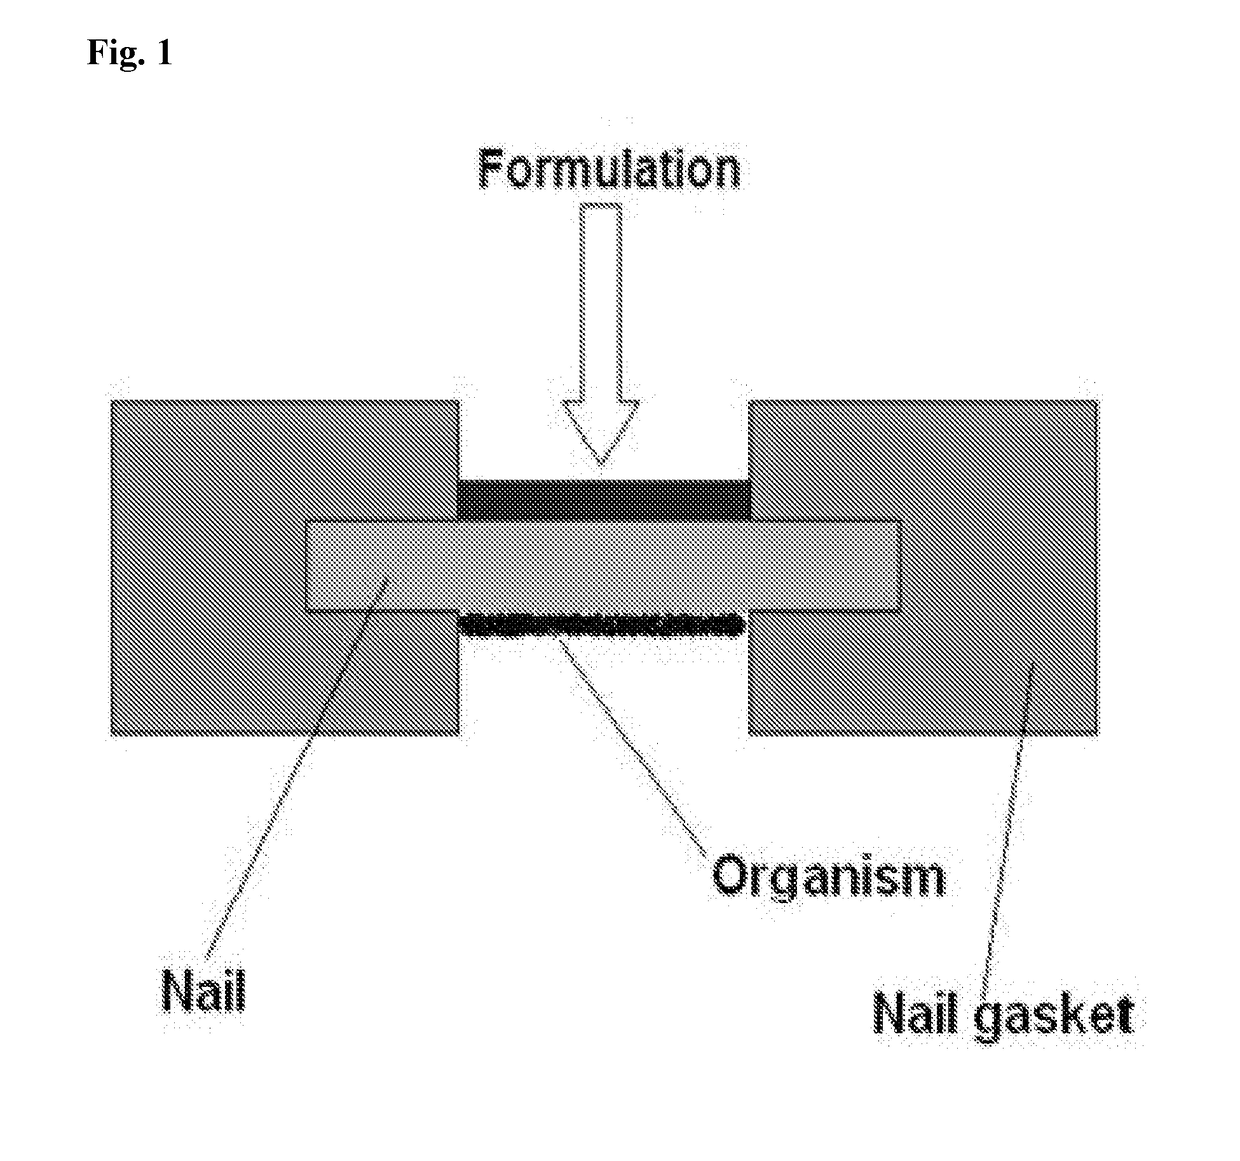 Nitric oxide releasing nail coating compositions, nitric oxide releasing nail coatings, and methods of using the same